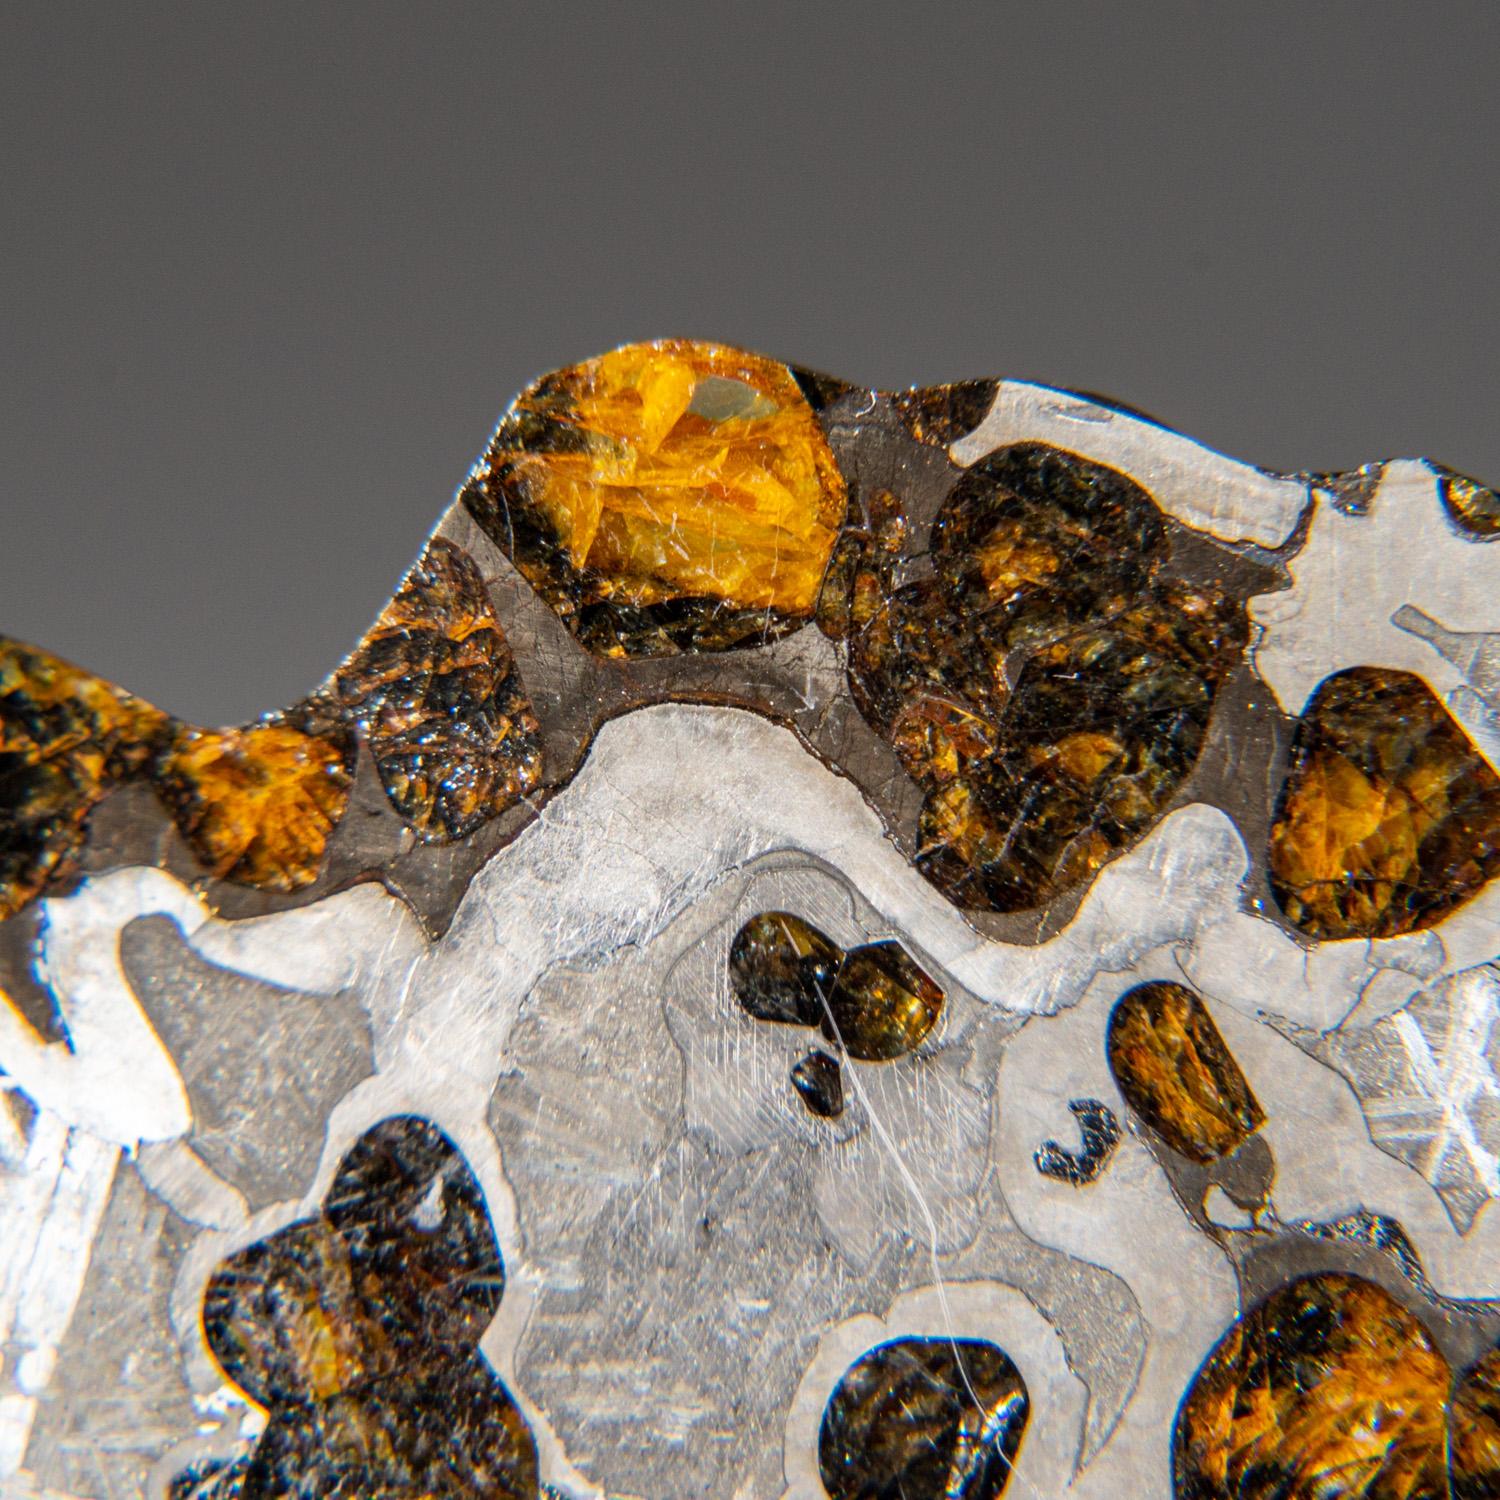 Brenham is a pallasite meteorite found near Haviland, a small town in Kiowa County, Kansas, United States. Pallasites are a type of stony–iron meteorite that when cut and polished show yellowish olivine crystals. The Brenham meteorite is associated